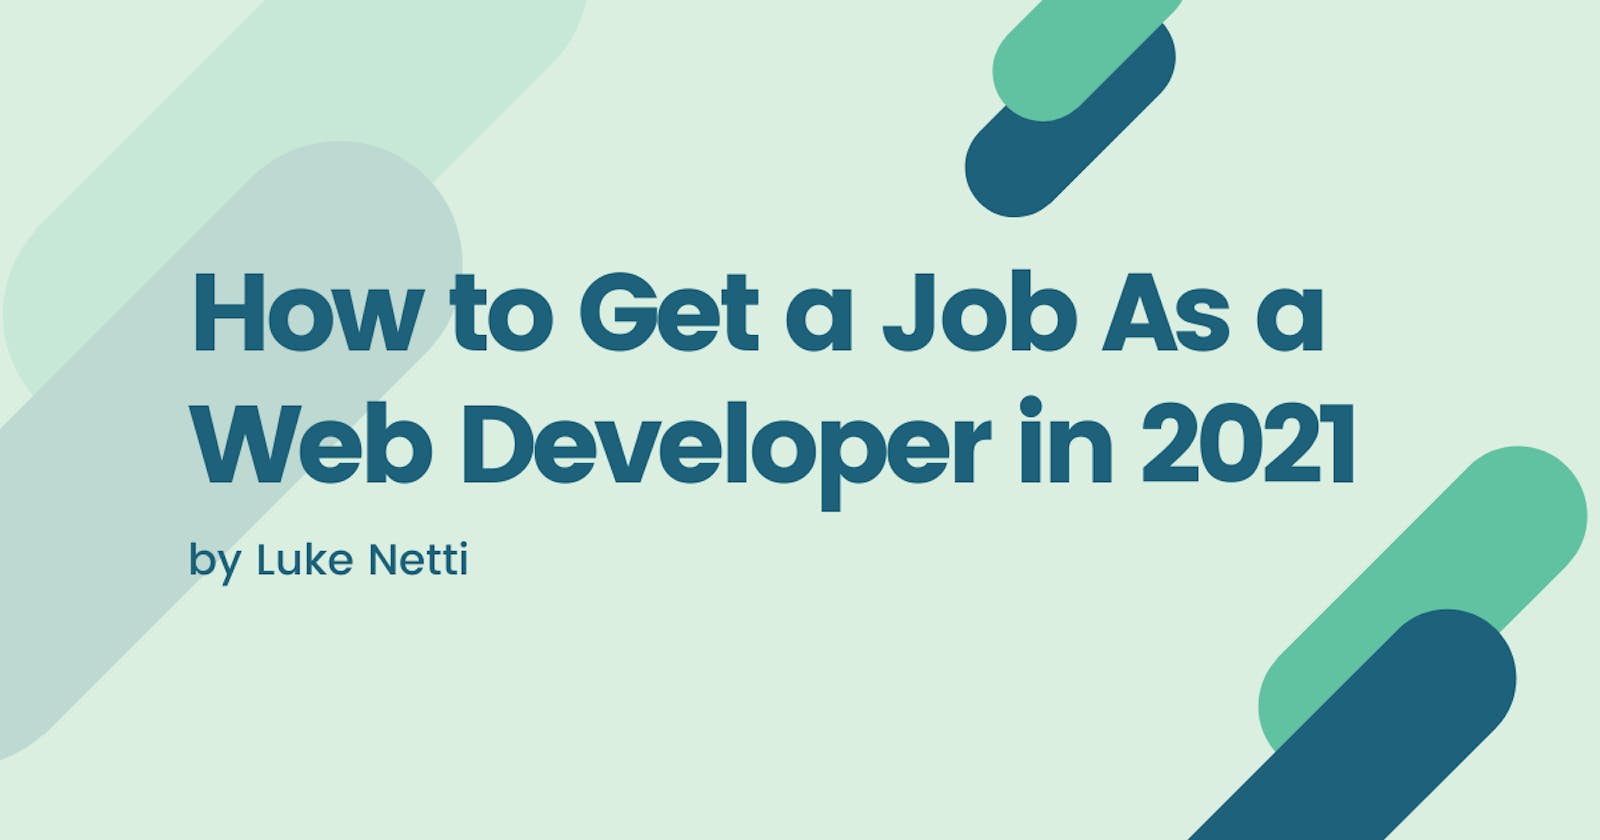 How to Get a Job As a Web Developer in 2021